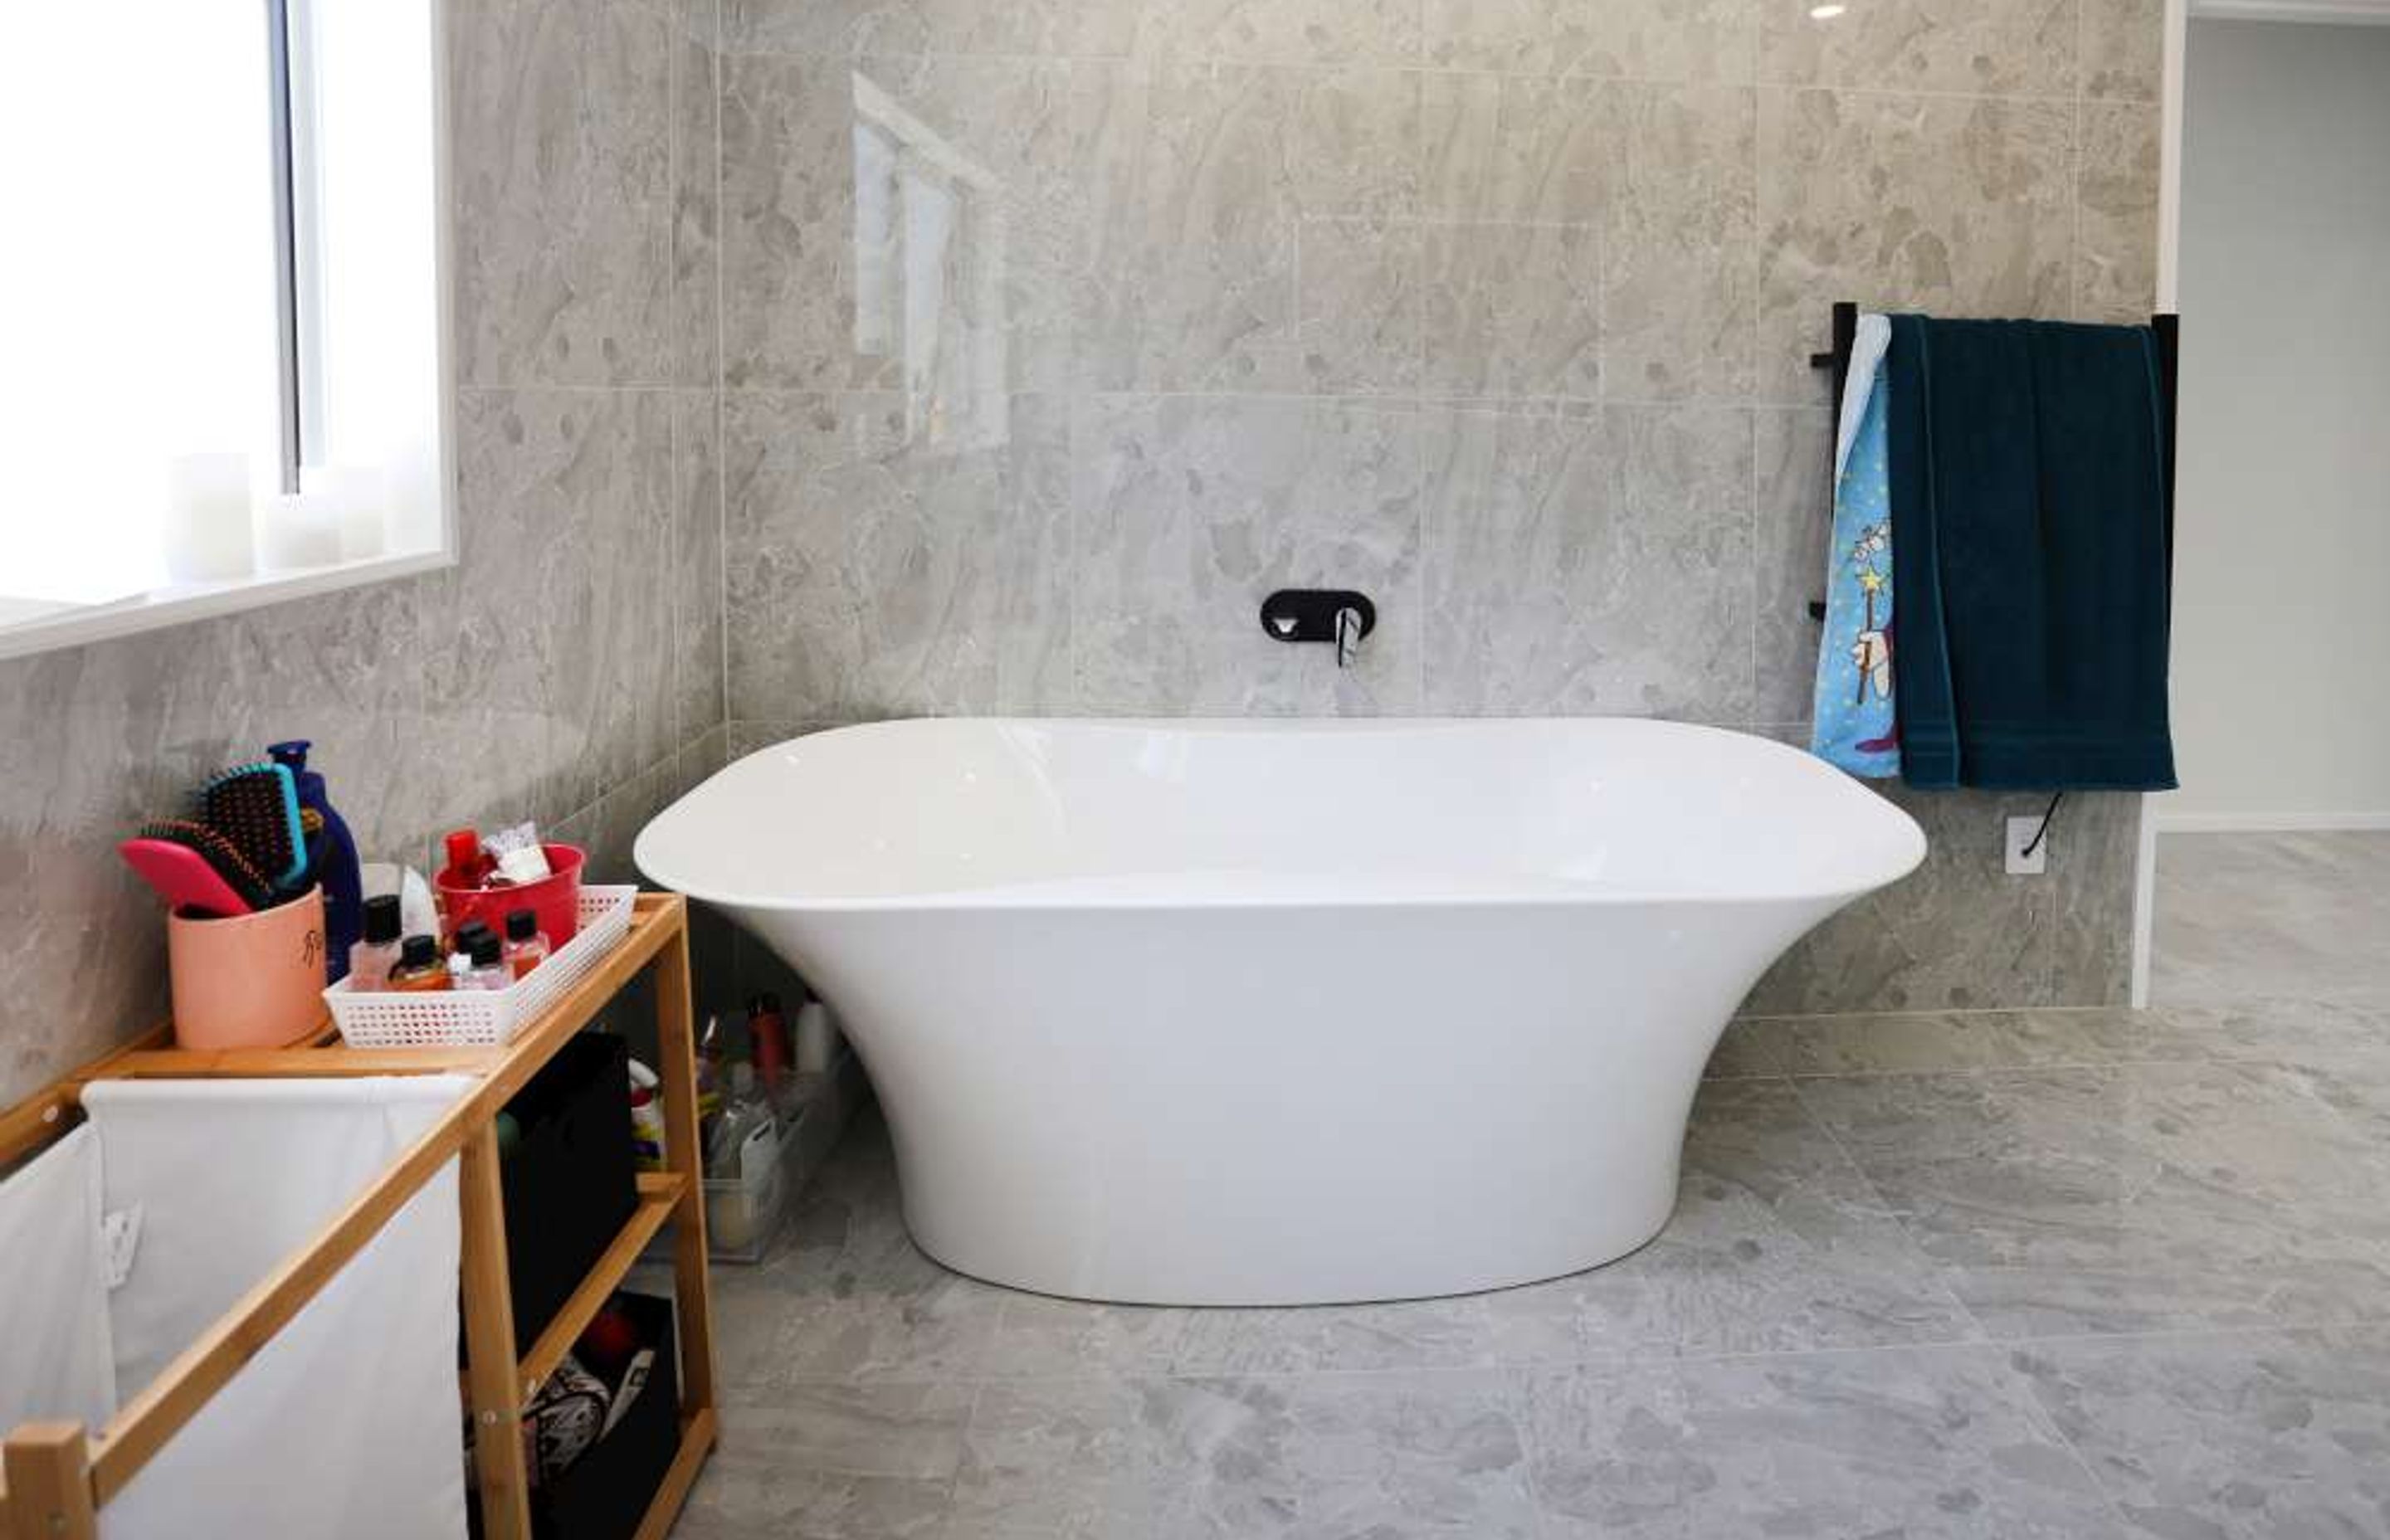 standing bathtub was incorporated in this ensuite in this bathroom renovation in West Harbour